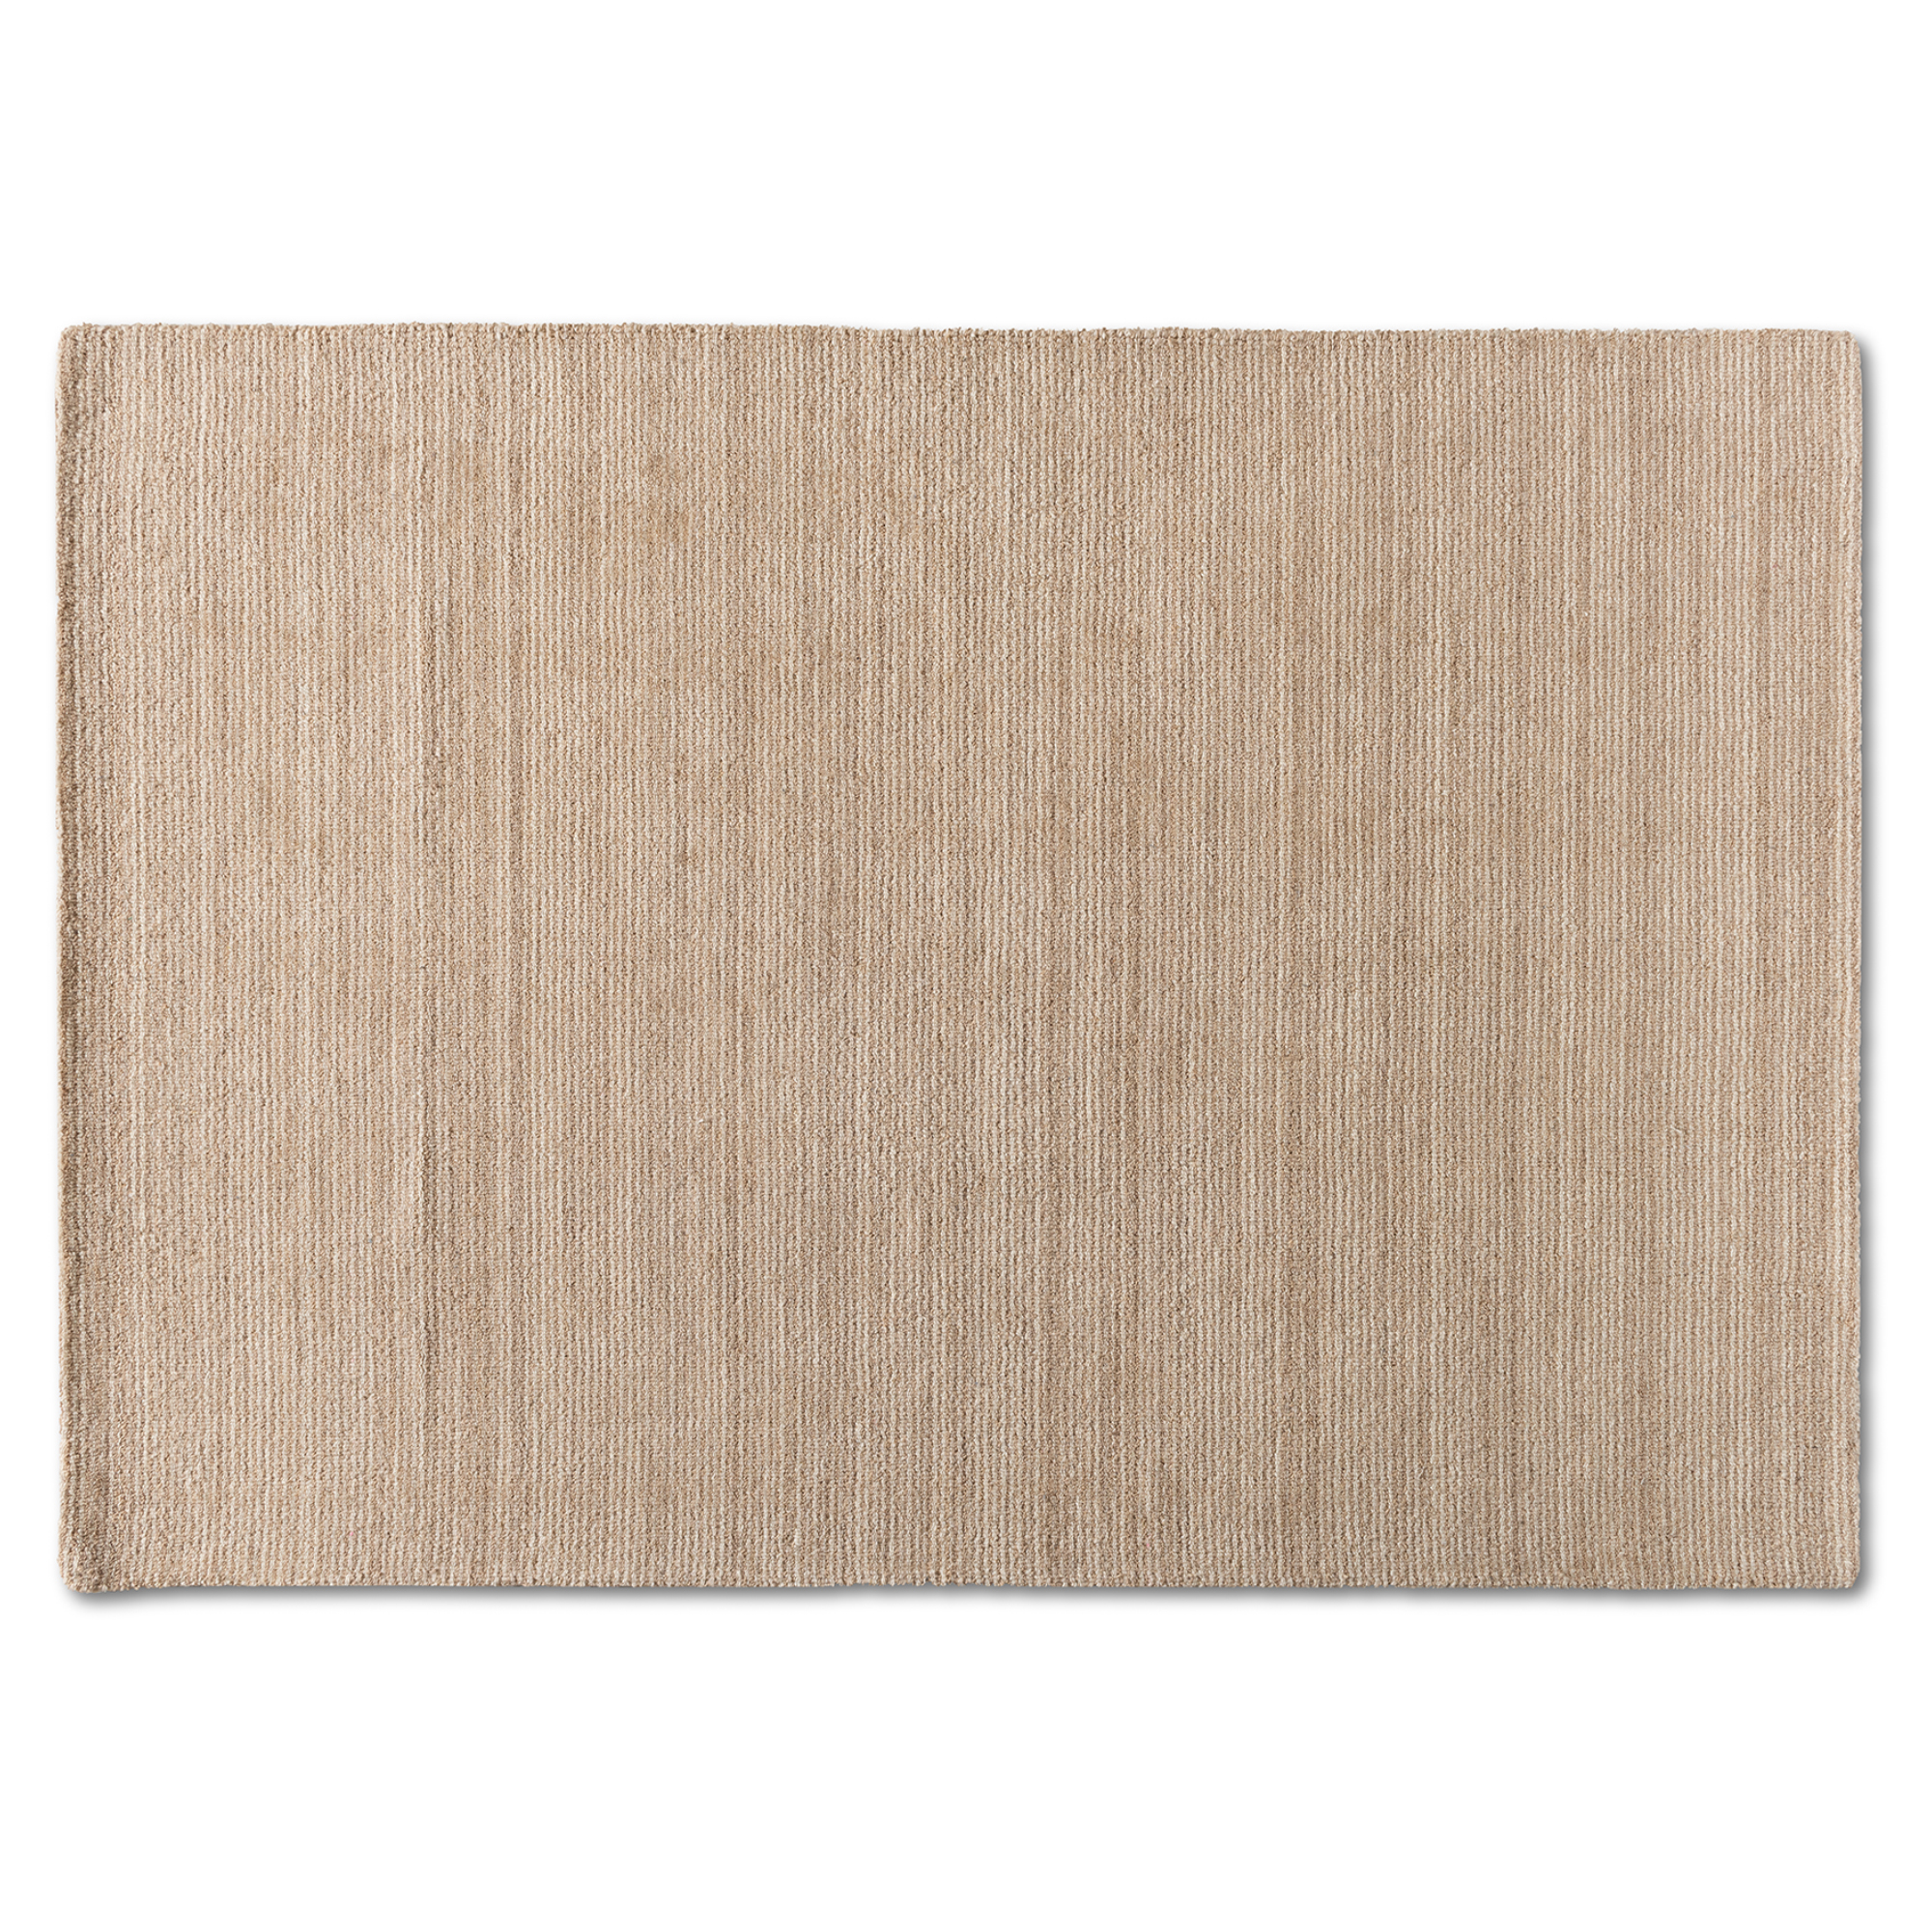 Baxton Studio Aral Modern and Contemporary Beige Handwoven Wool Area Rug